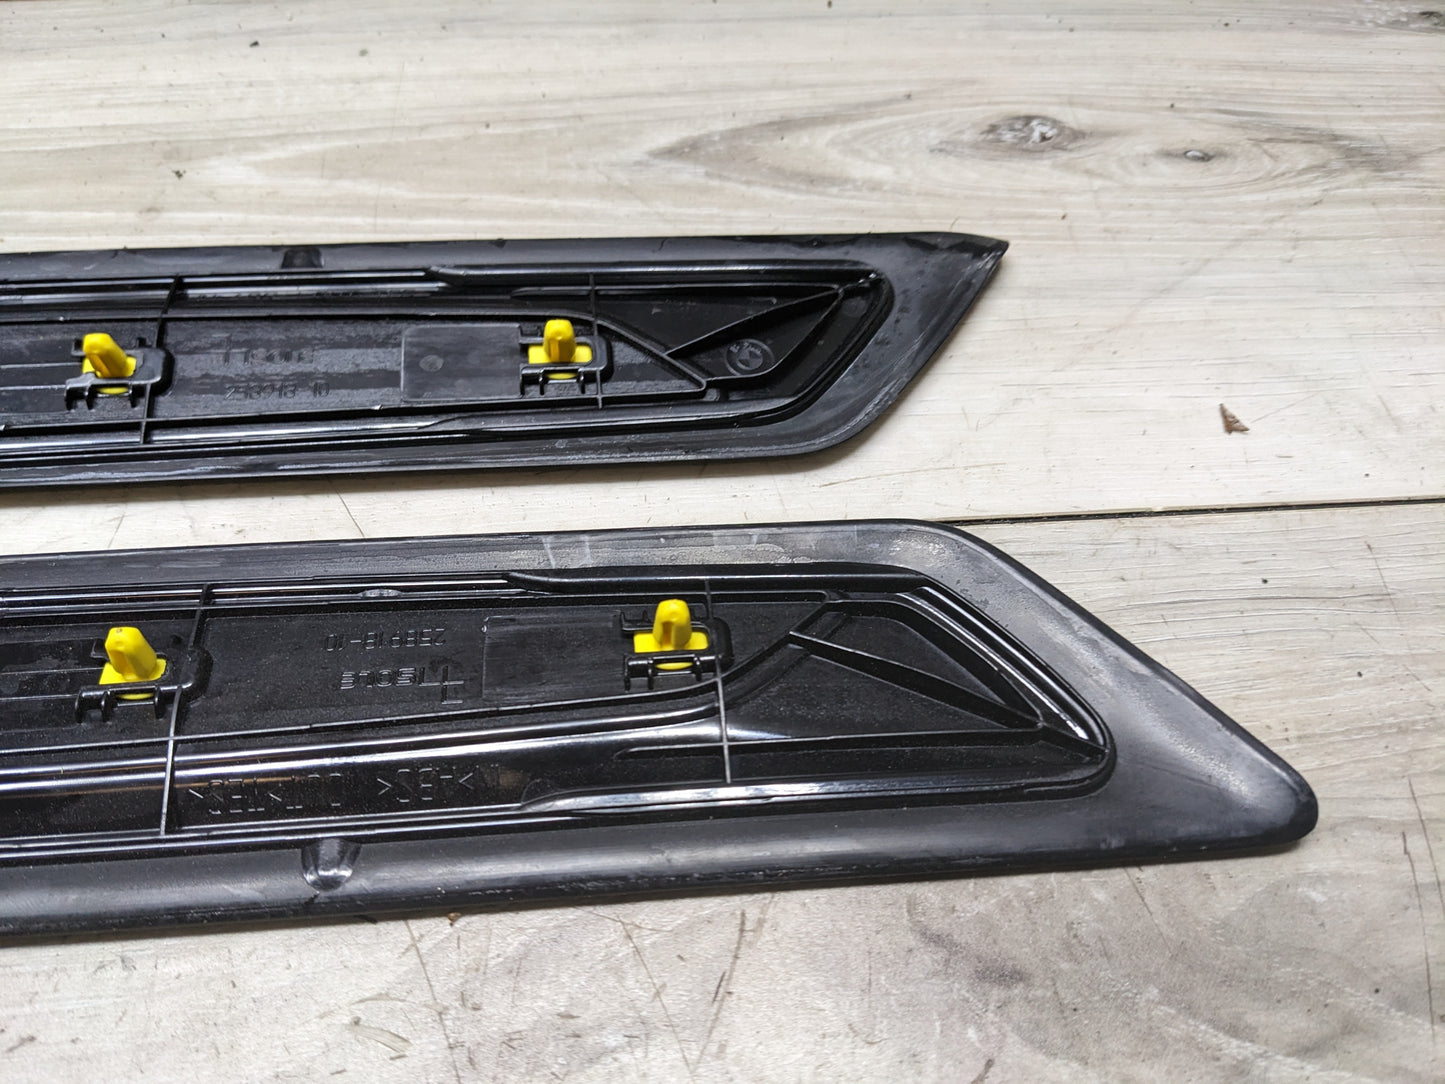 15-18 OEM BMW F80 M3 Front Door Sill Cover Trim Entrance Sill Kick Plates SET